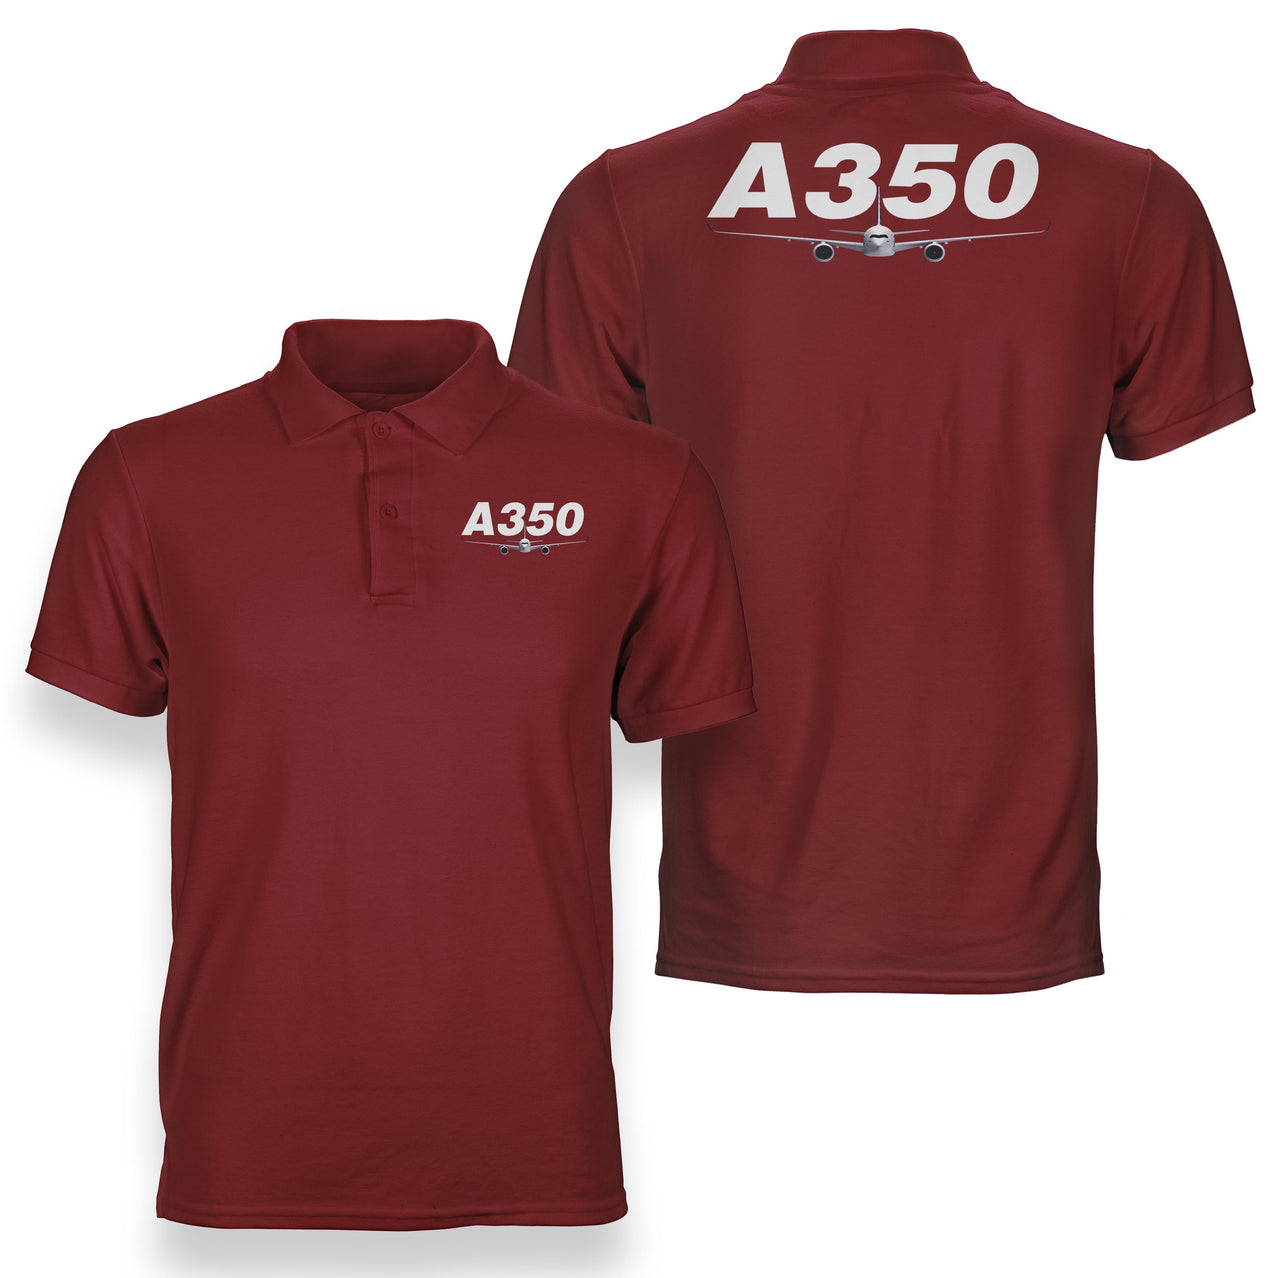 Super Airbus A350 Designed Double Side Polo T-Shirts